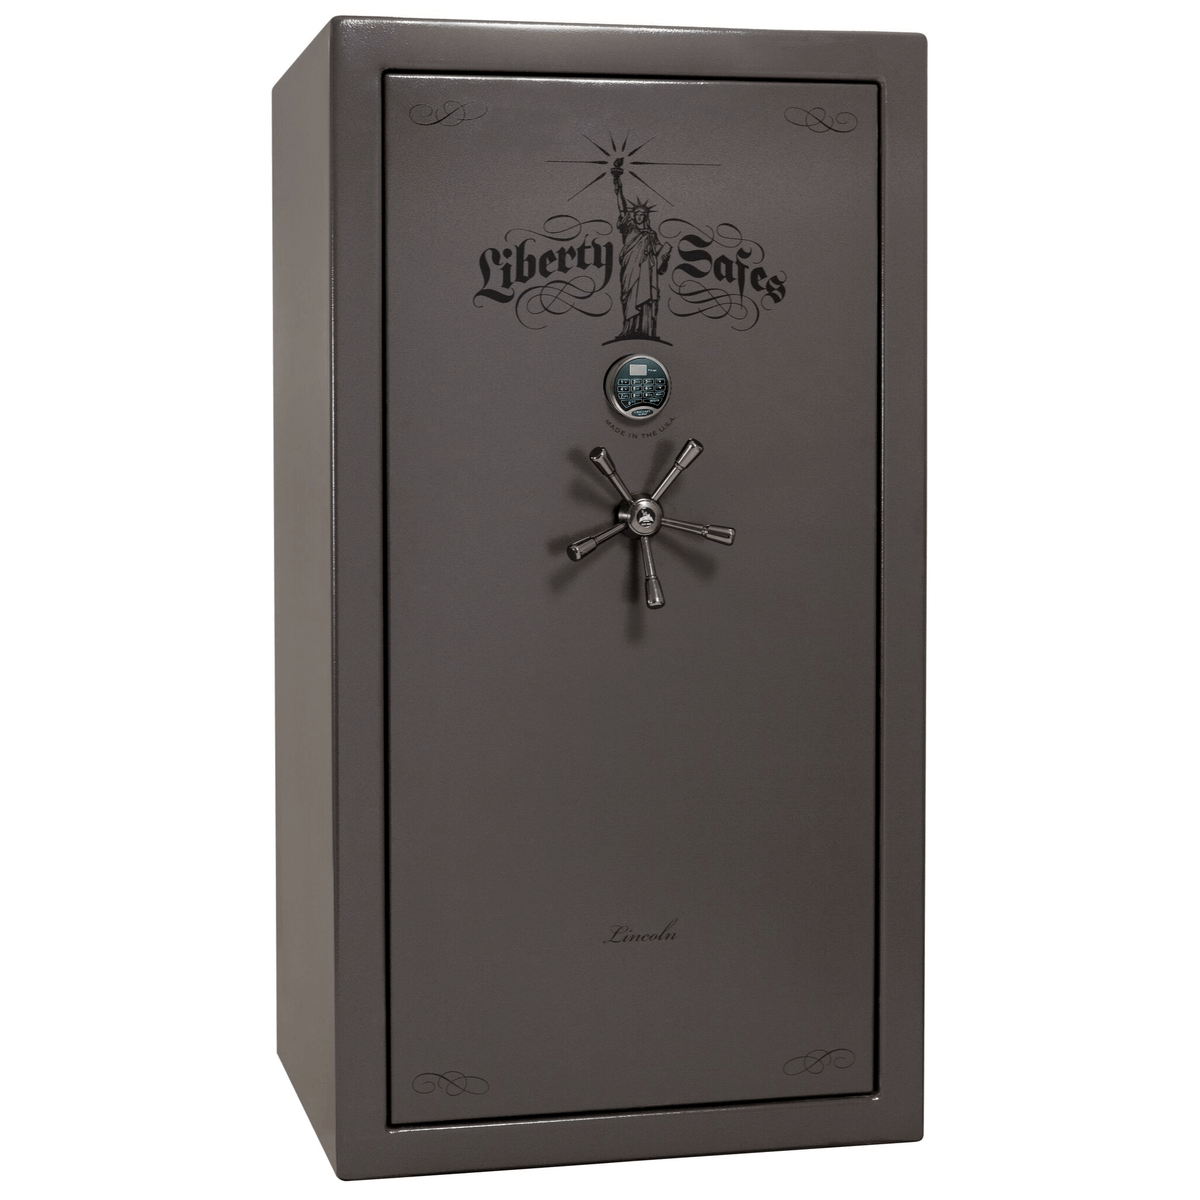 Liberty Lincoln 40 Safe in Gray Marble with Black Chrome Electronic Lock.